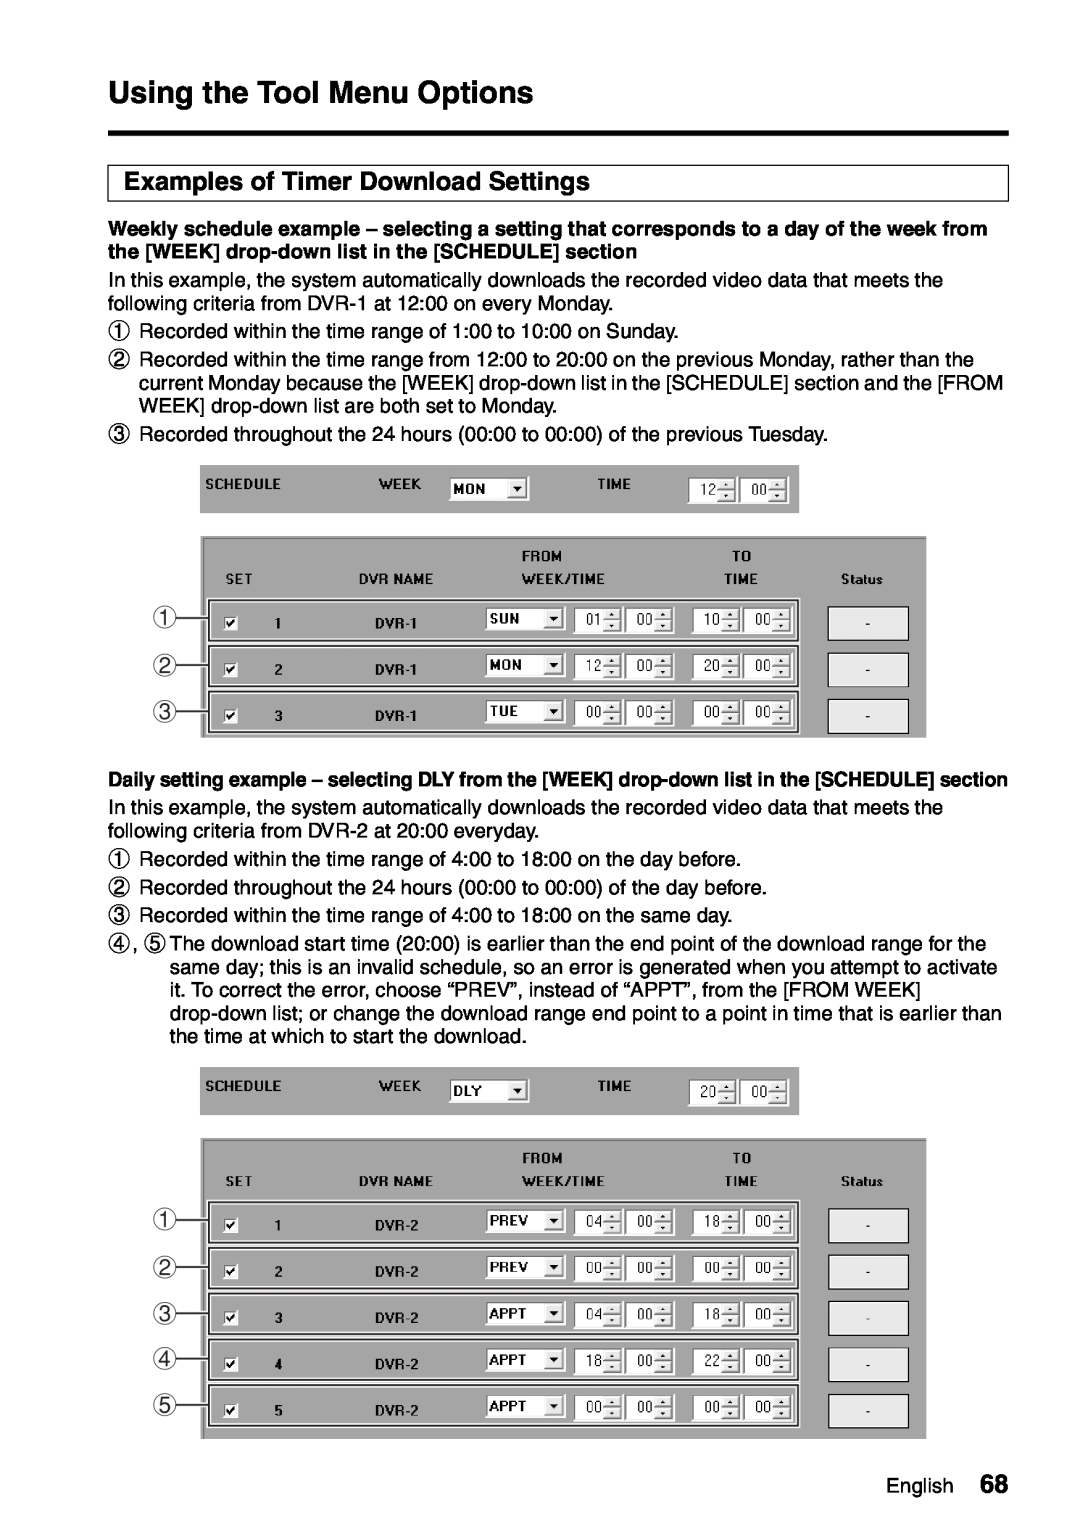 Sanyo VA-SW8000LITE instruction manual Examples of Timer Download Settings, 1 2 3 4 5, Using the Tool Menu Options 